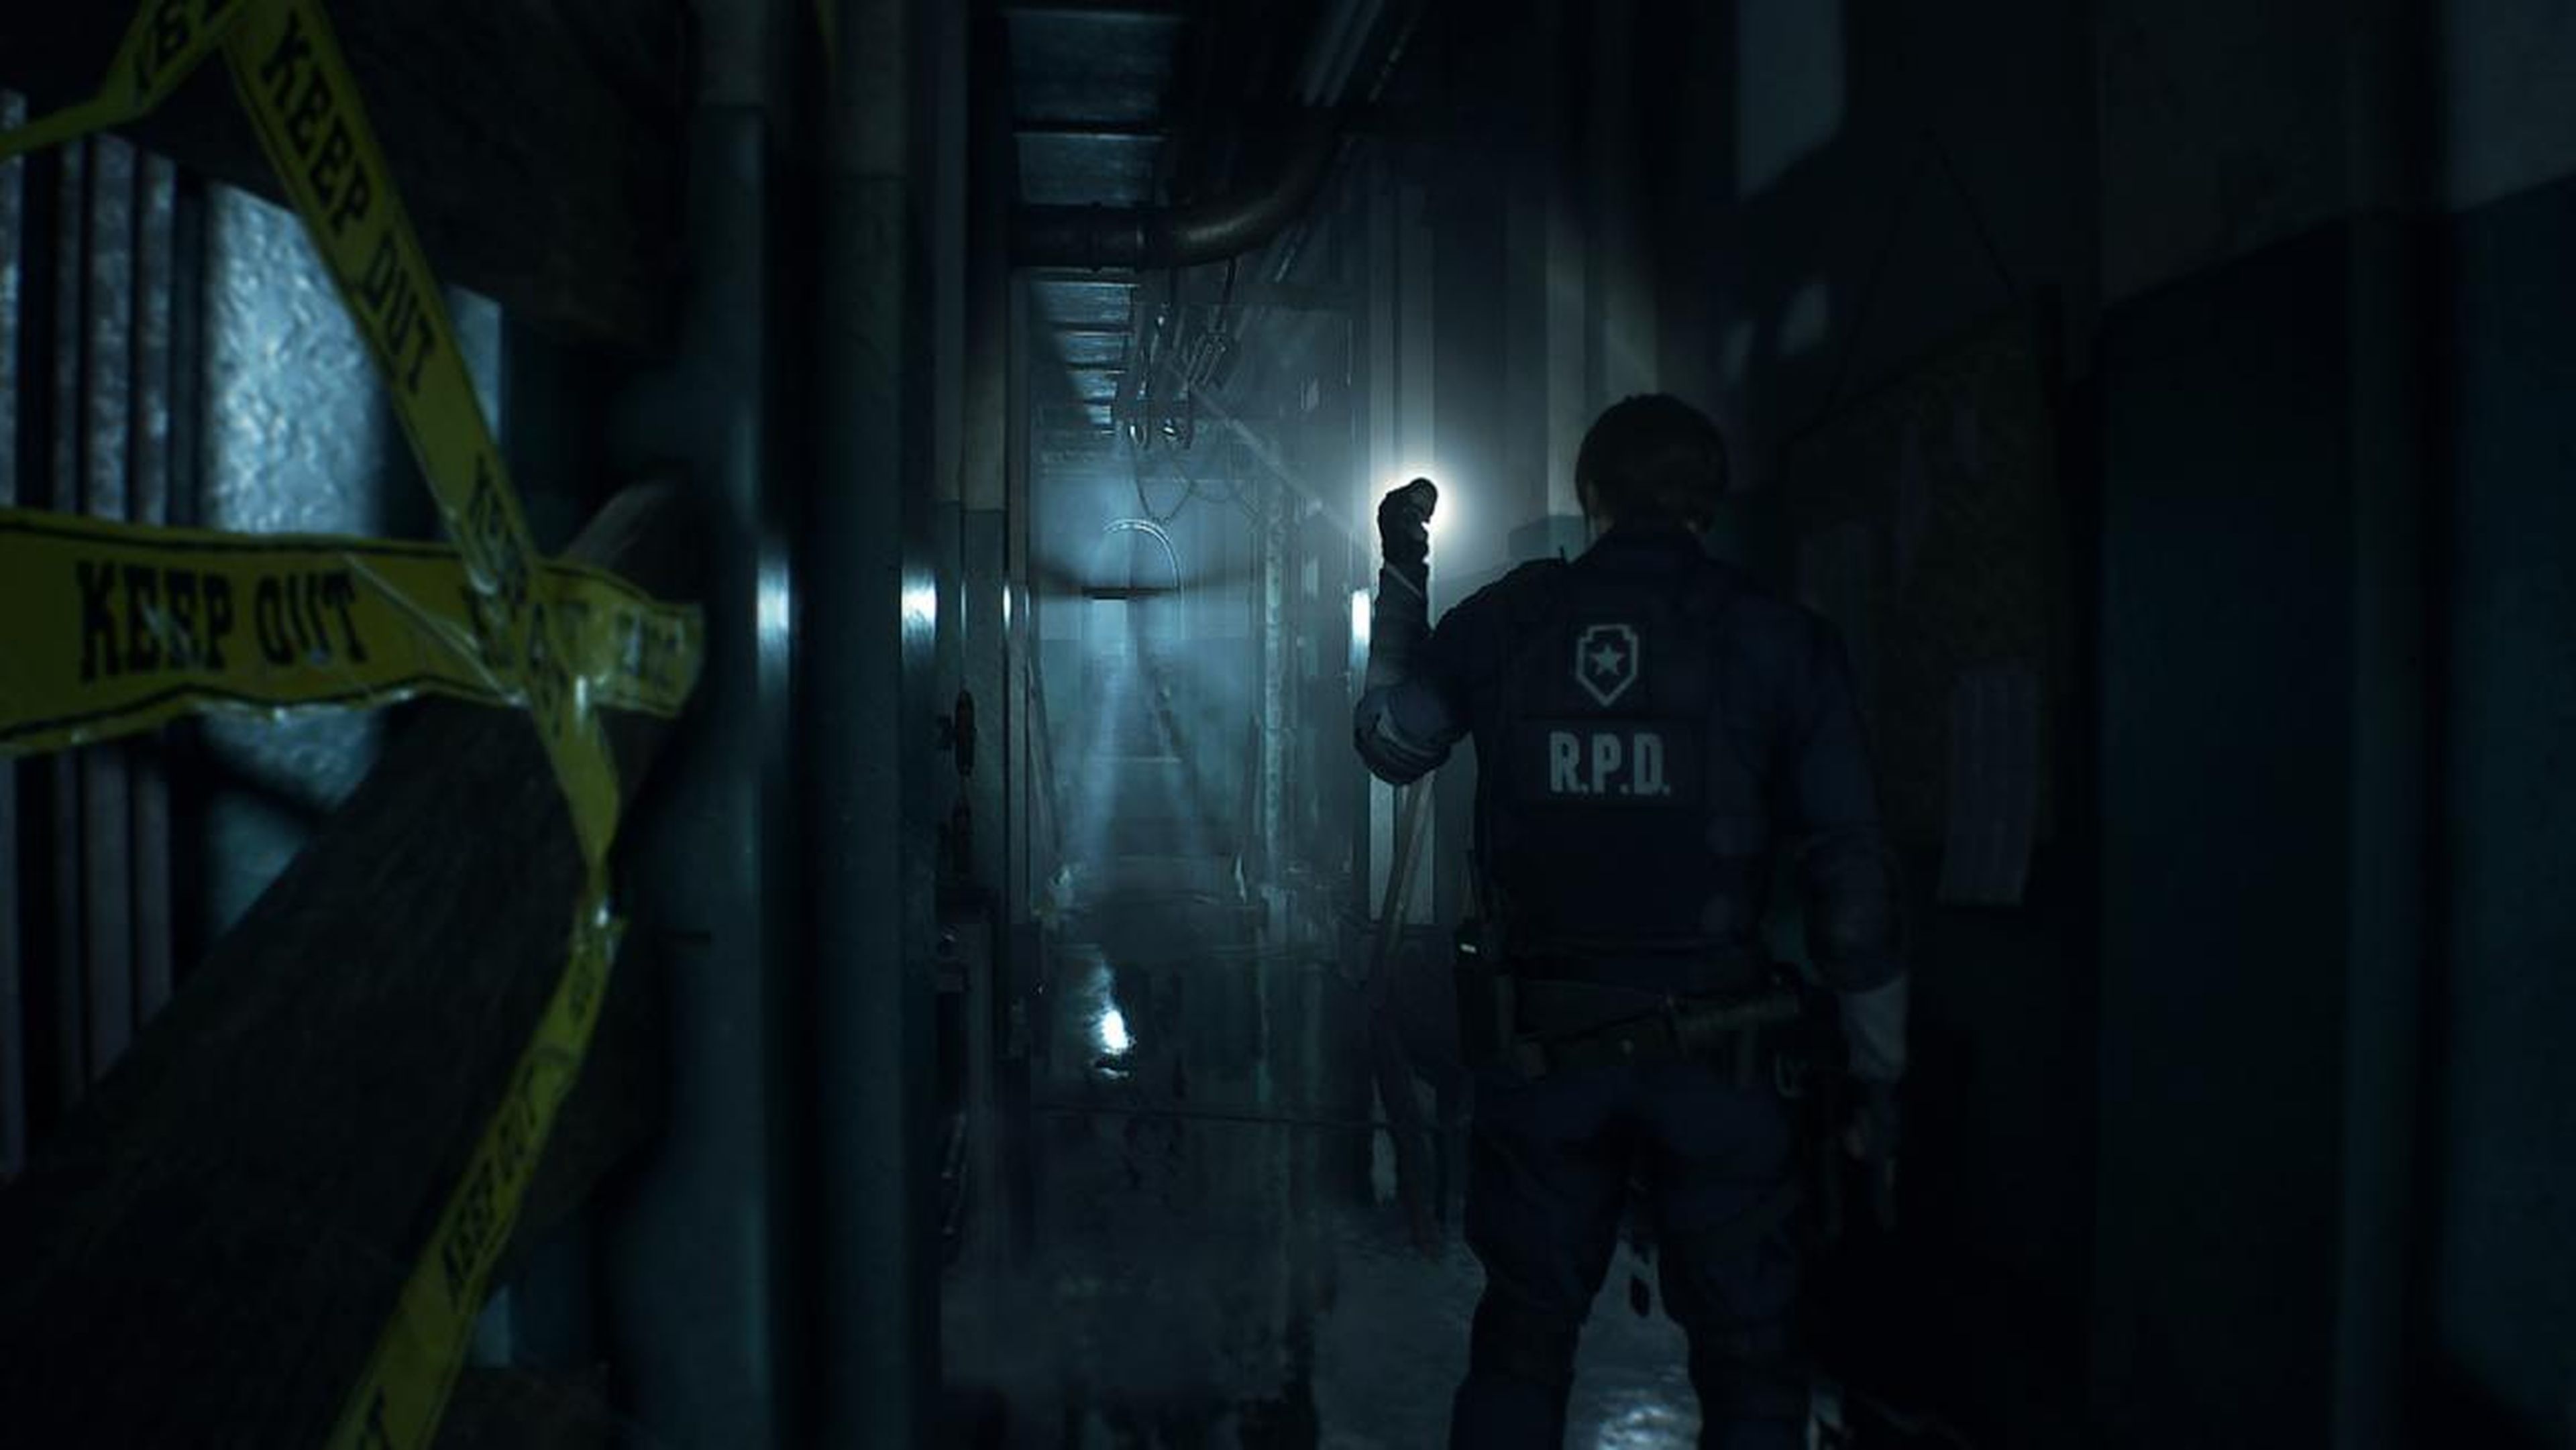 In "Resident Evil 2," you play as both characters at different points in the game — each has their own unique storylines, obstacles, and challenges to overcome.